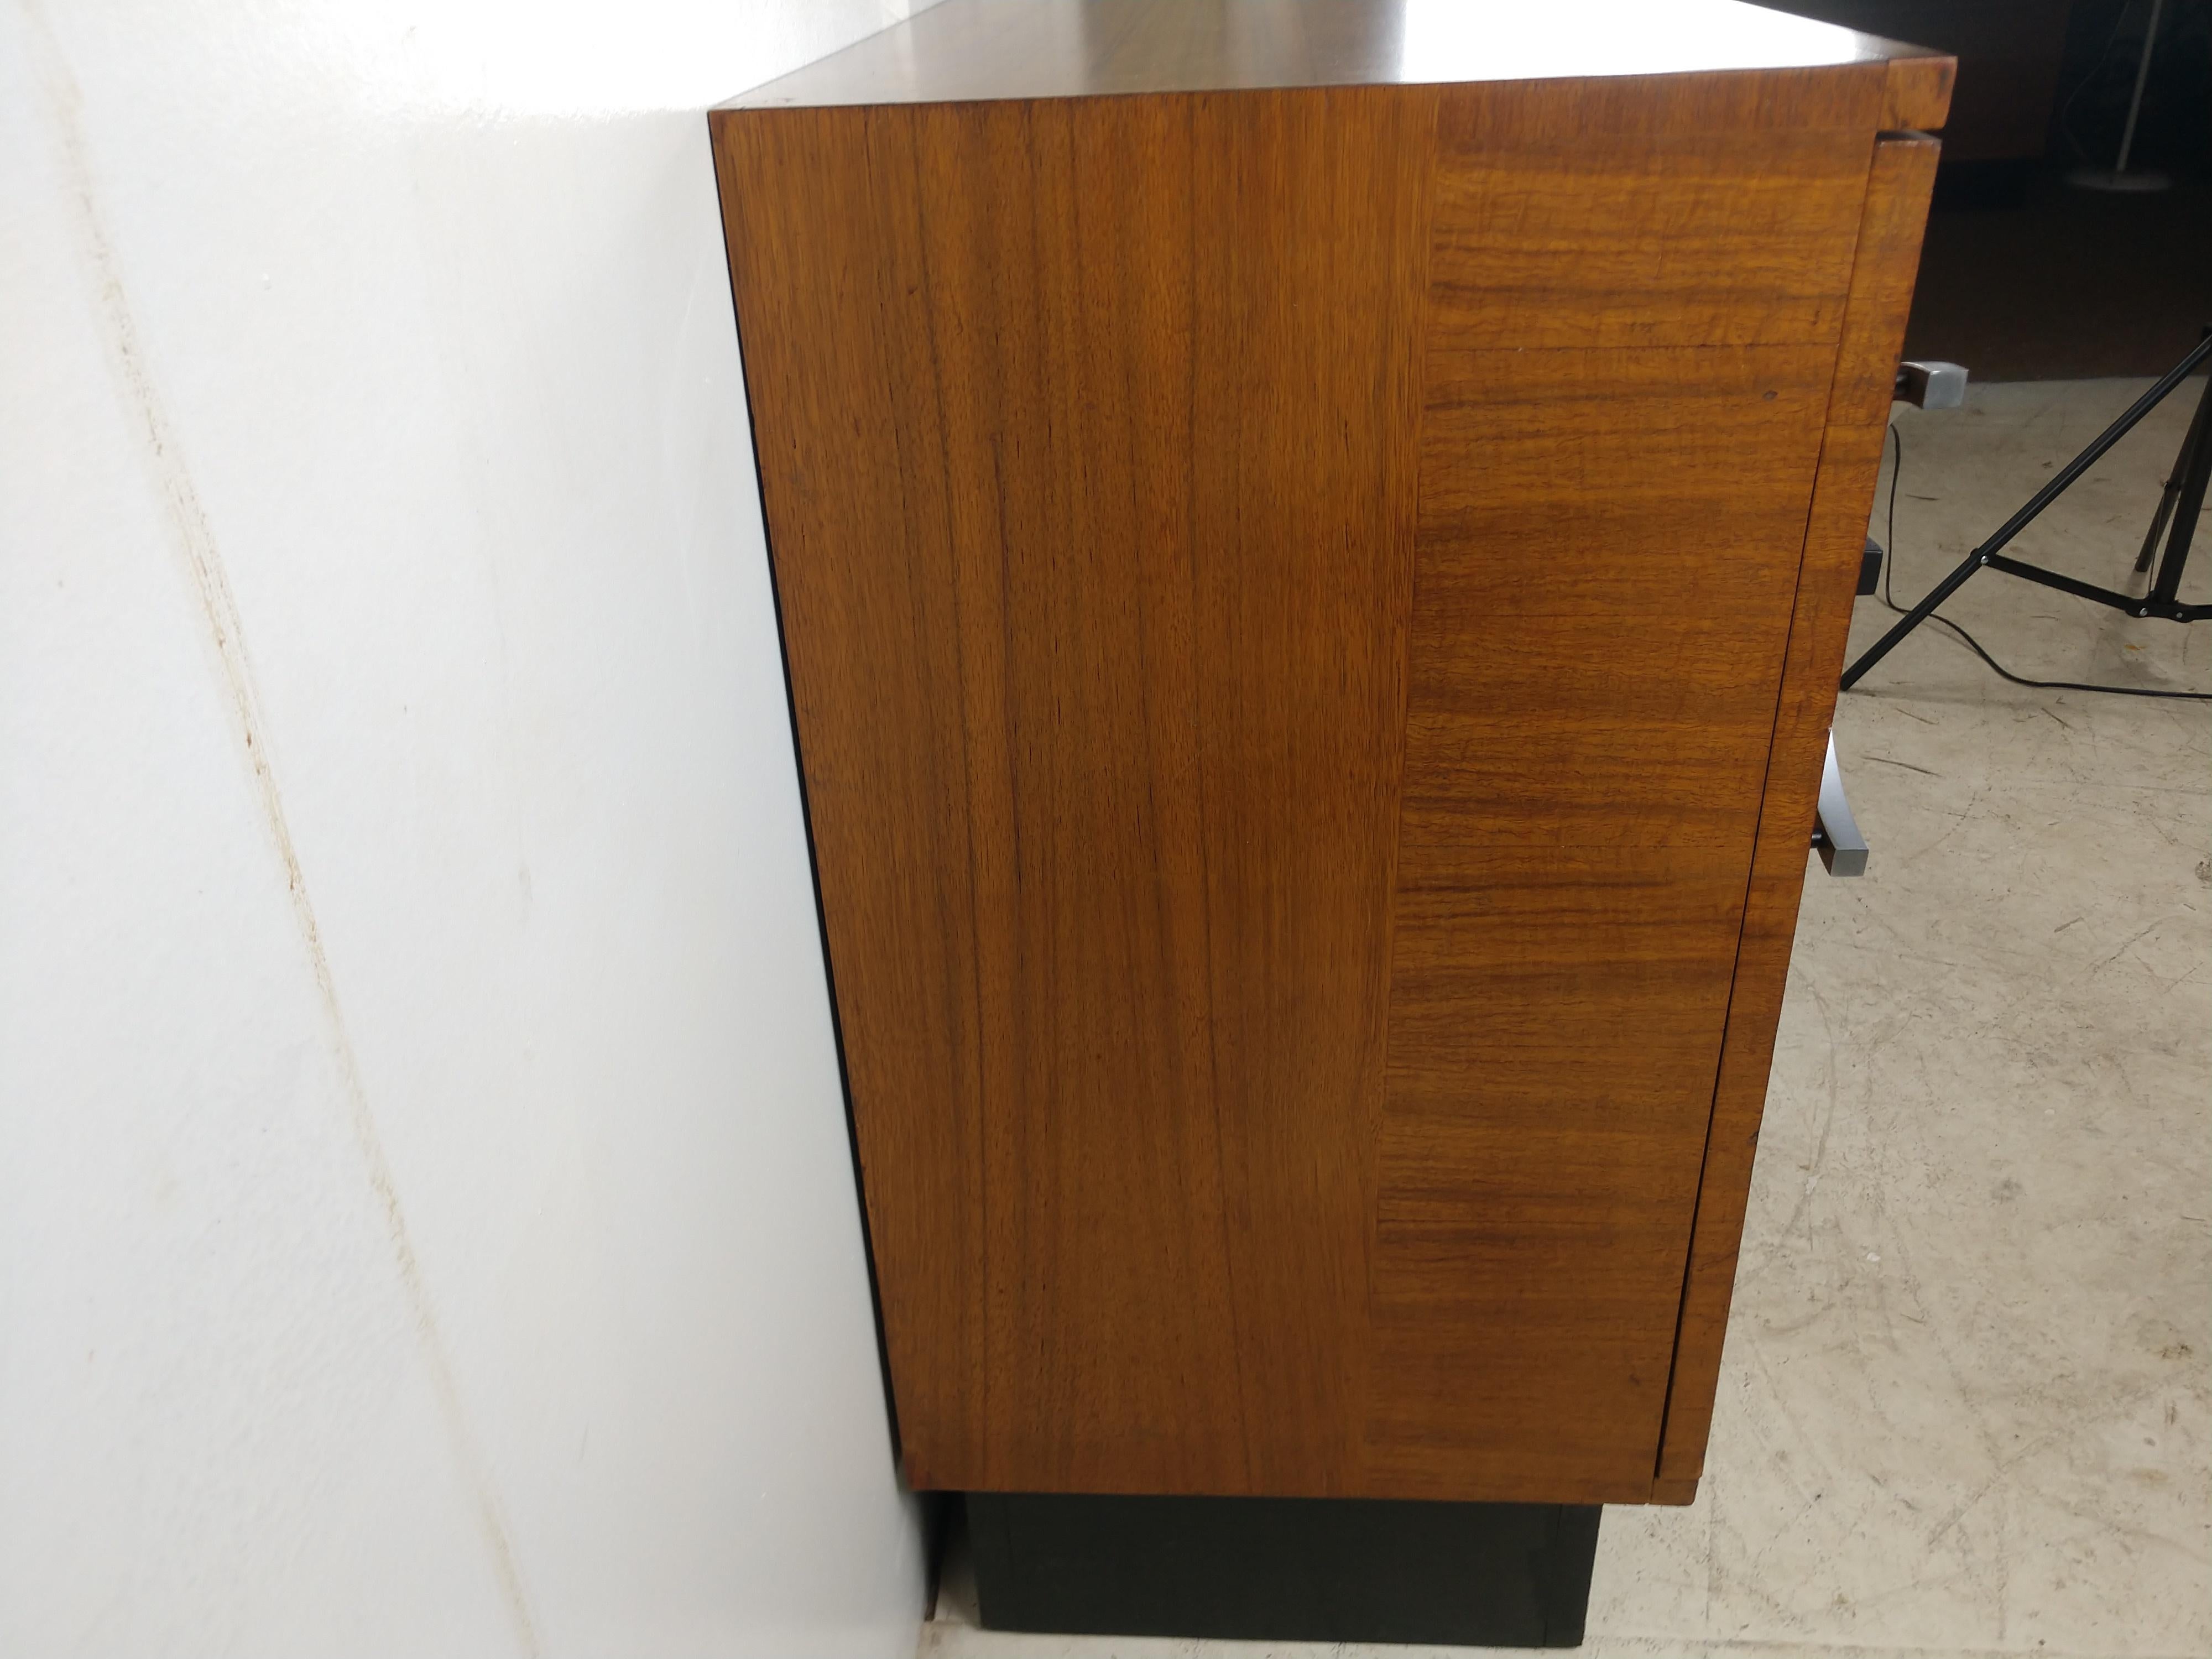 American Art Deco Credenza Bar Server by Gilbert Rohde for Herman Miller